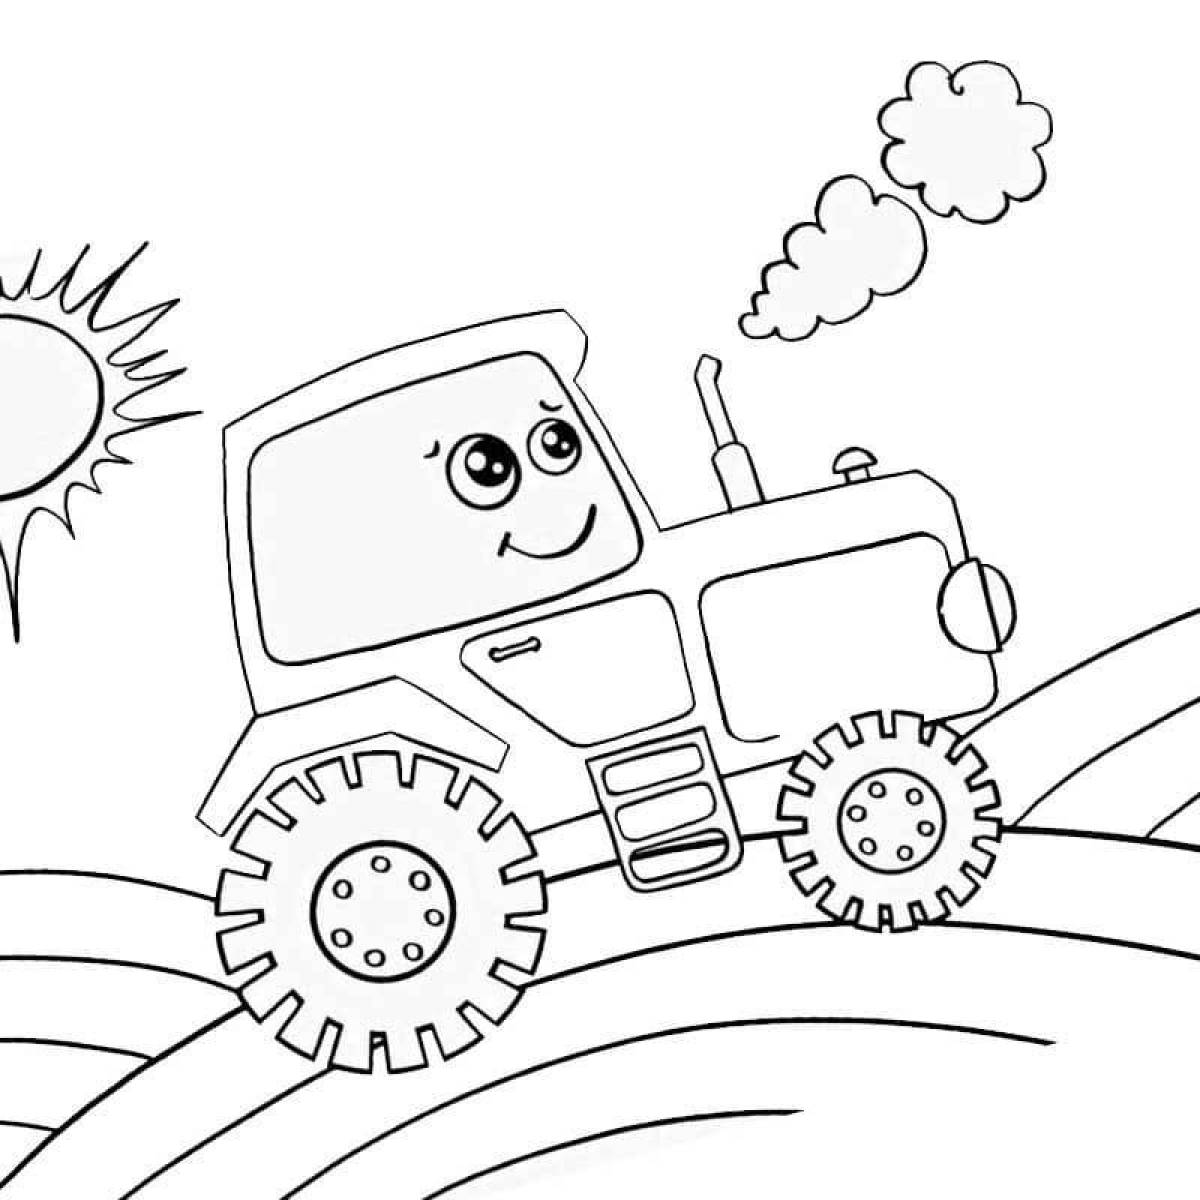 Gorgeous blue tractor coloring book for kids